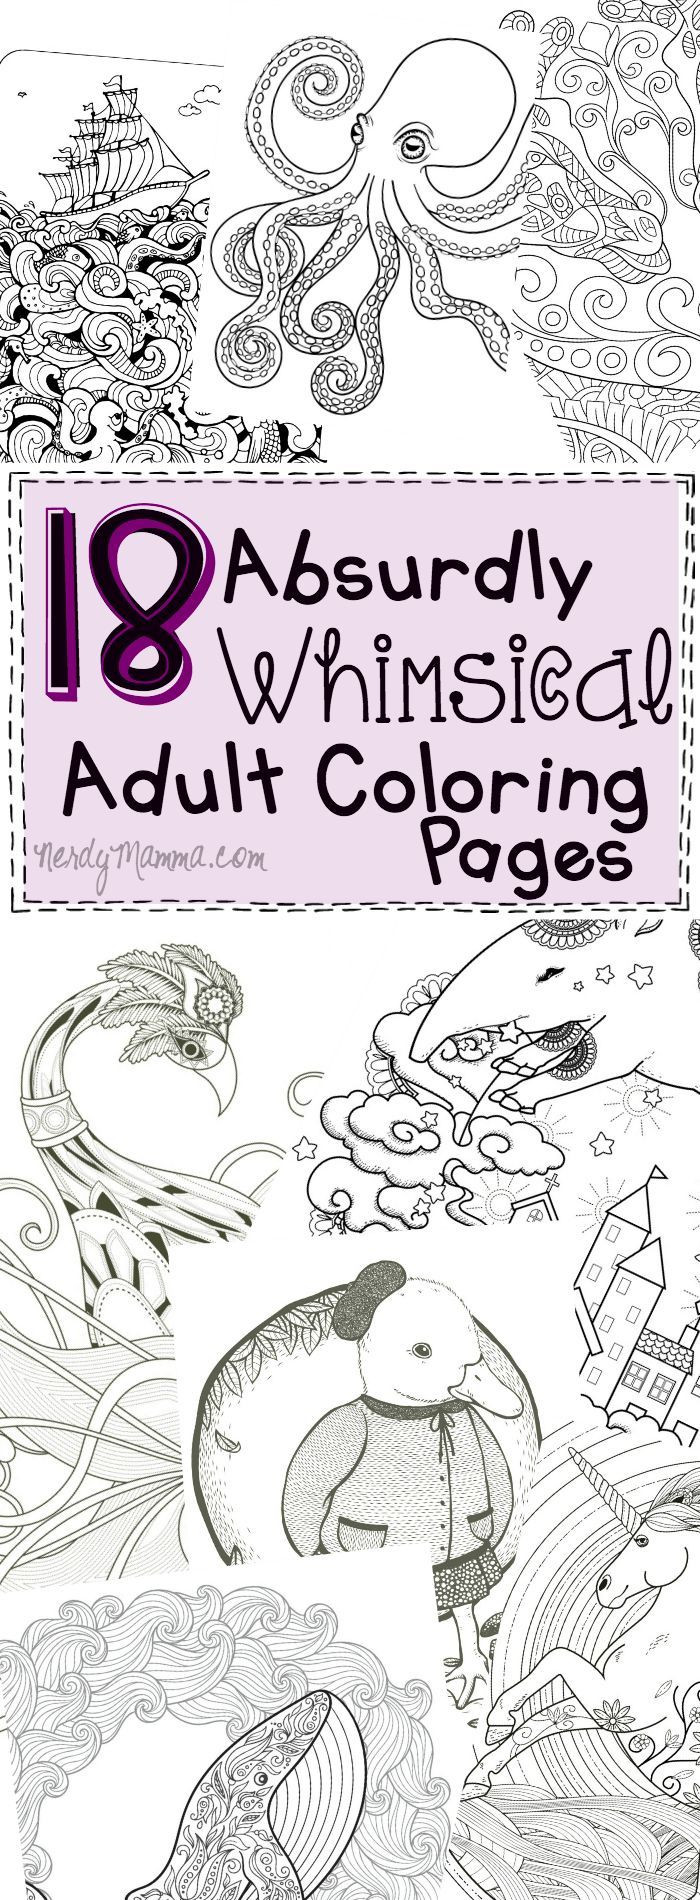 Top Rated Adult Coloring Books
 17 Best images about Adult Coloring Pages on Pinterest